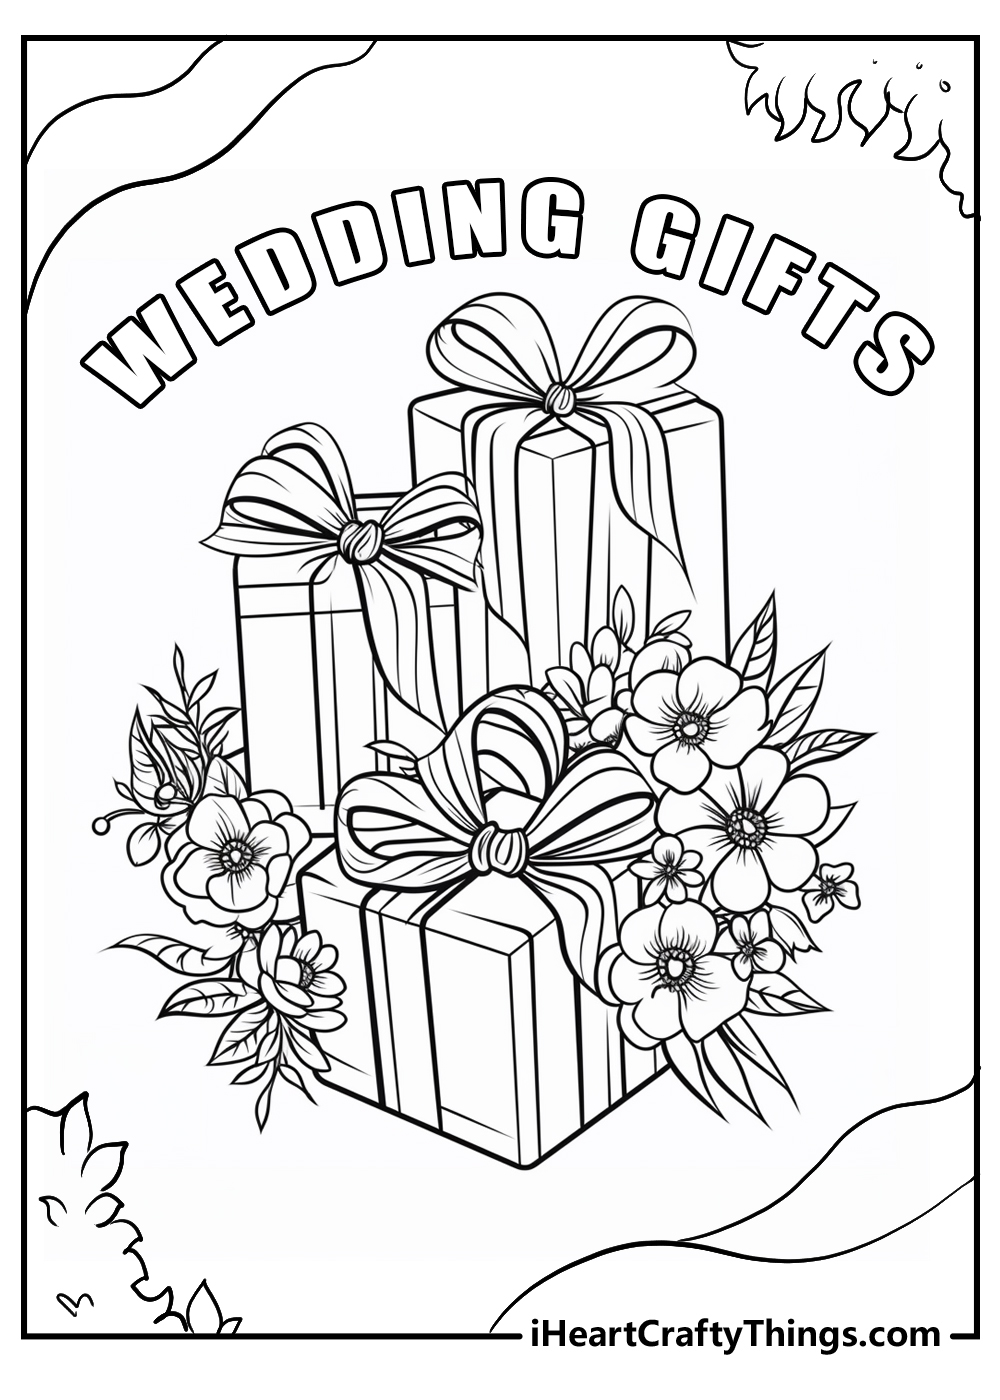 wedding gifts coloring pages